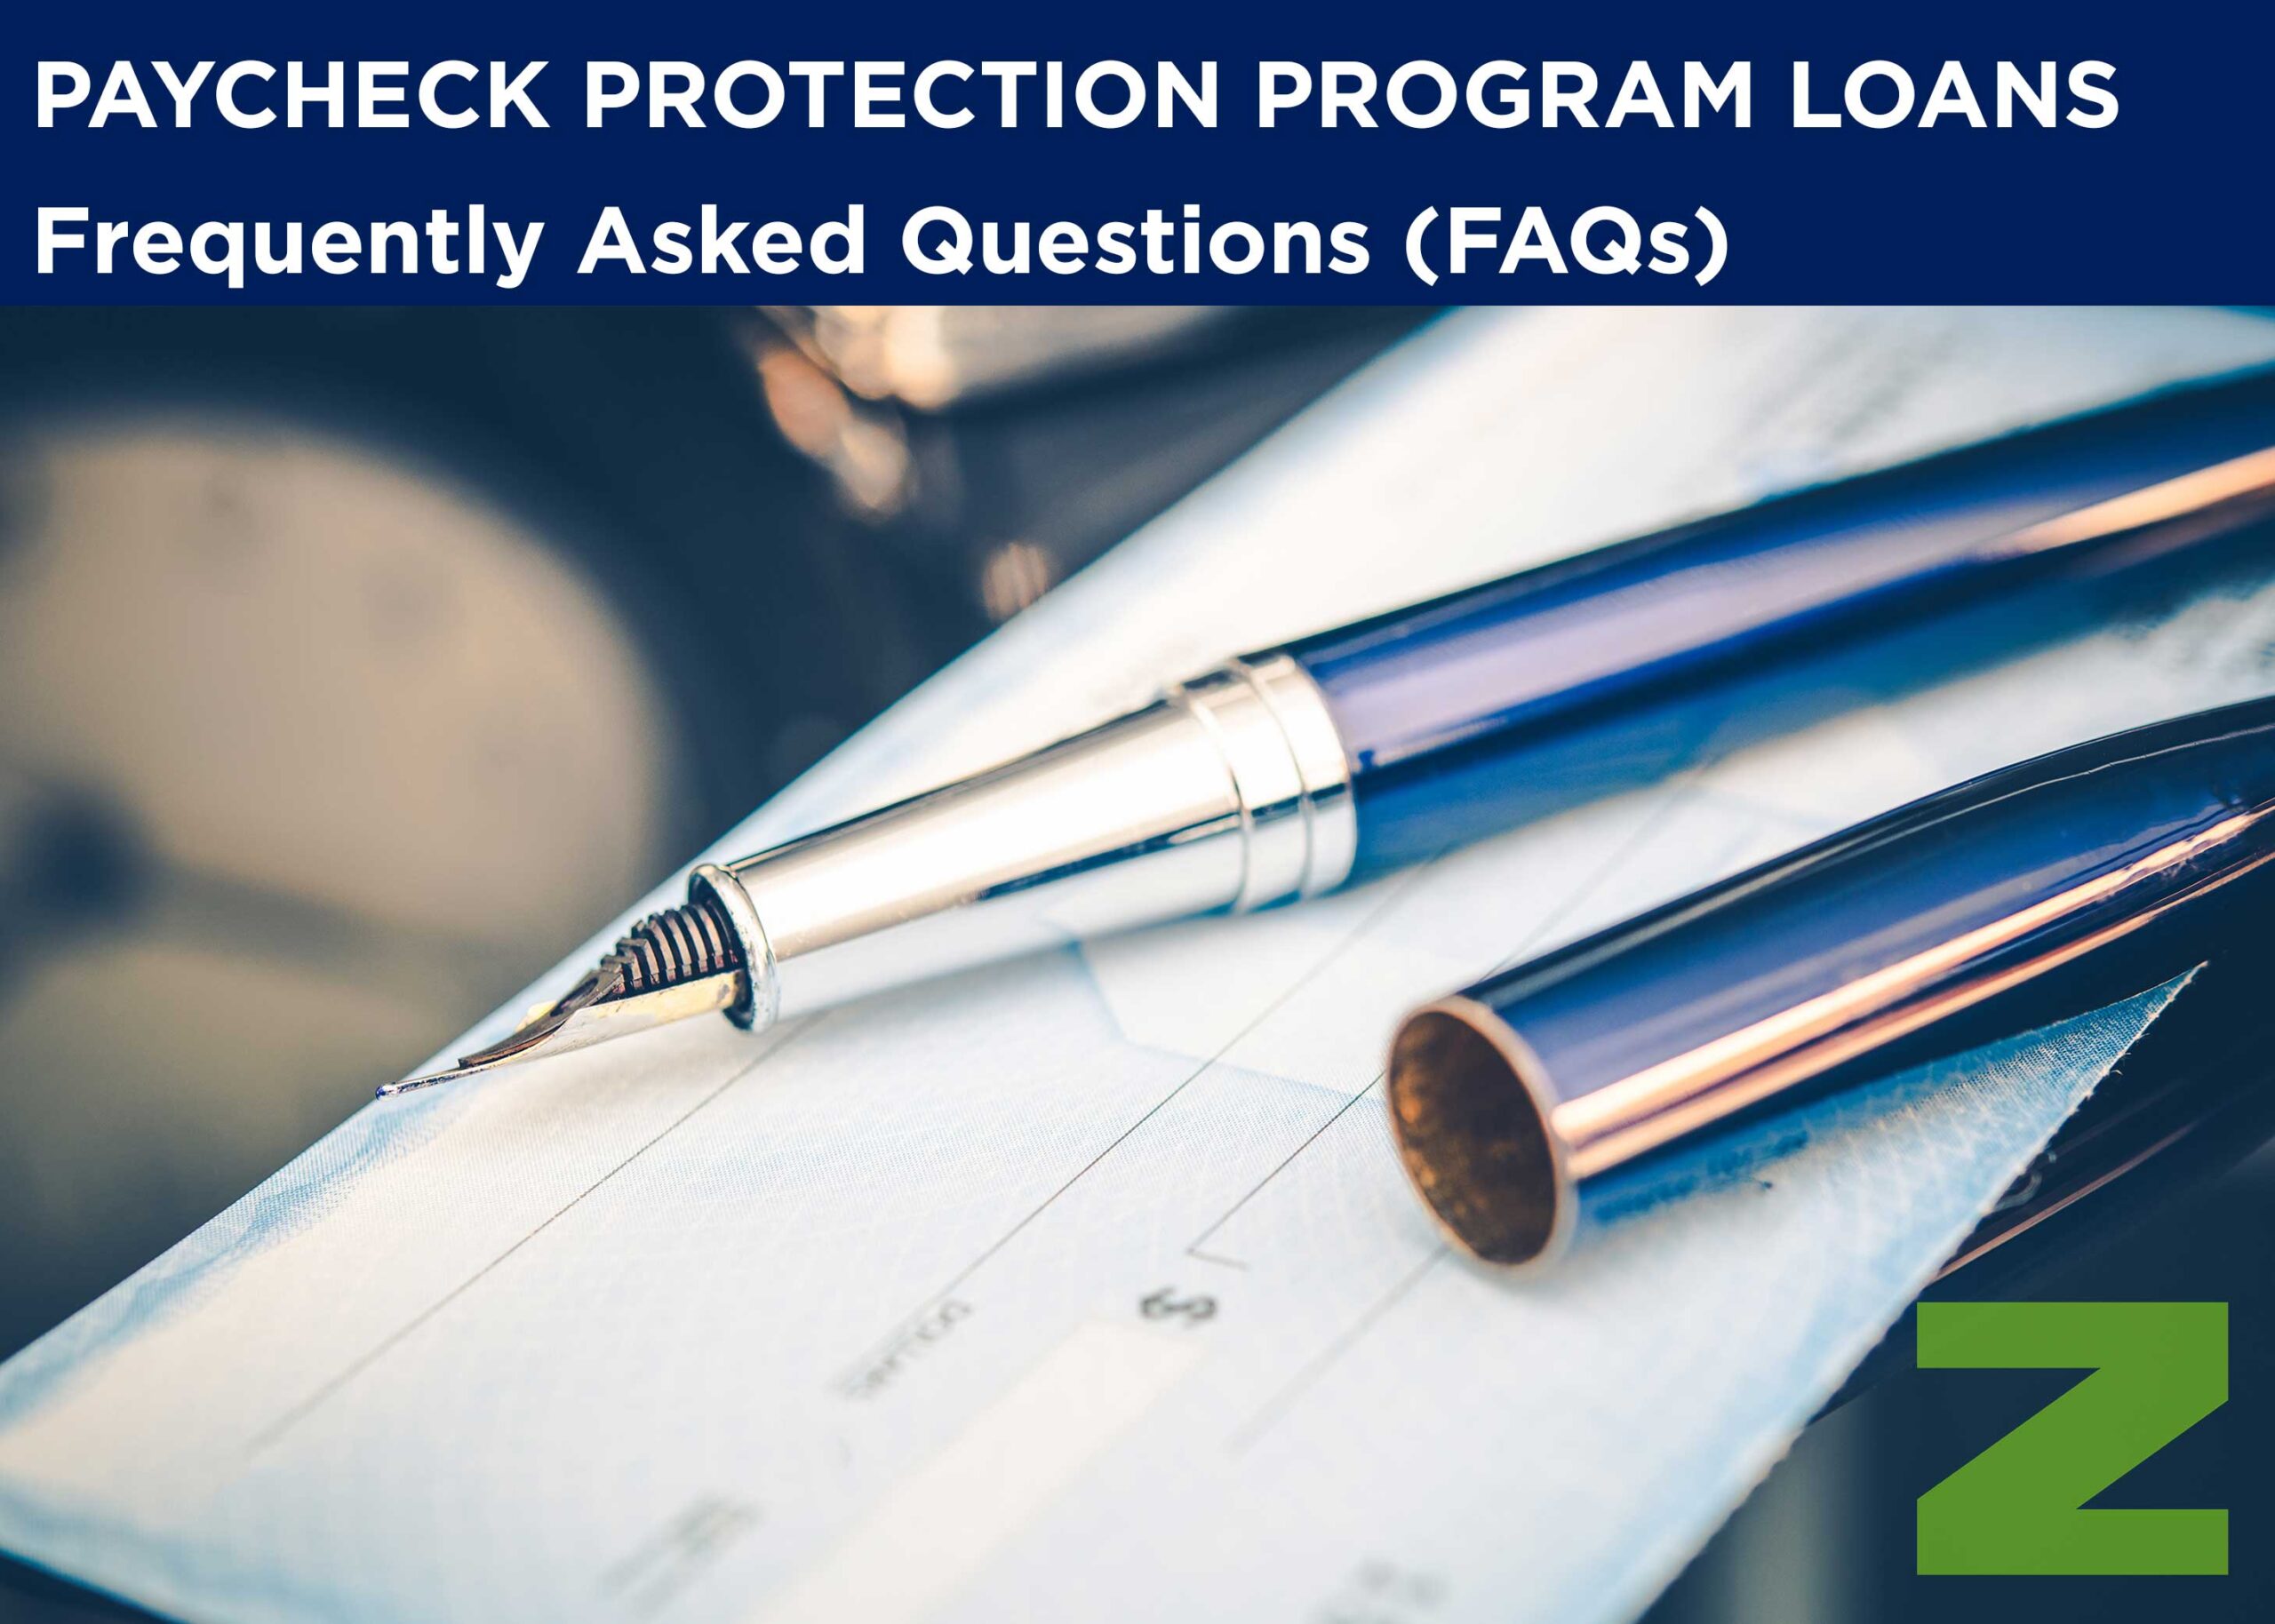 PAYCHECK PROTECTION PROGRAM LOANS Frequently Asked Questions (FAQs)